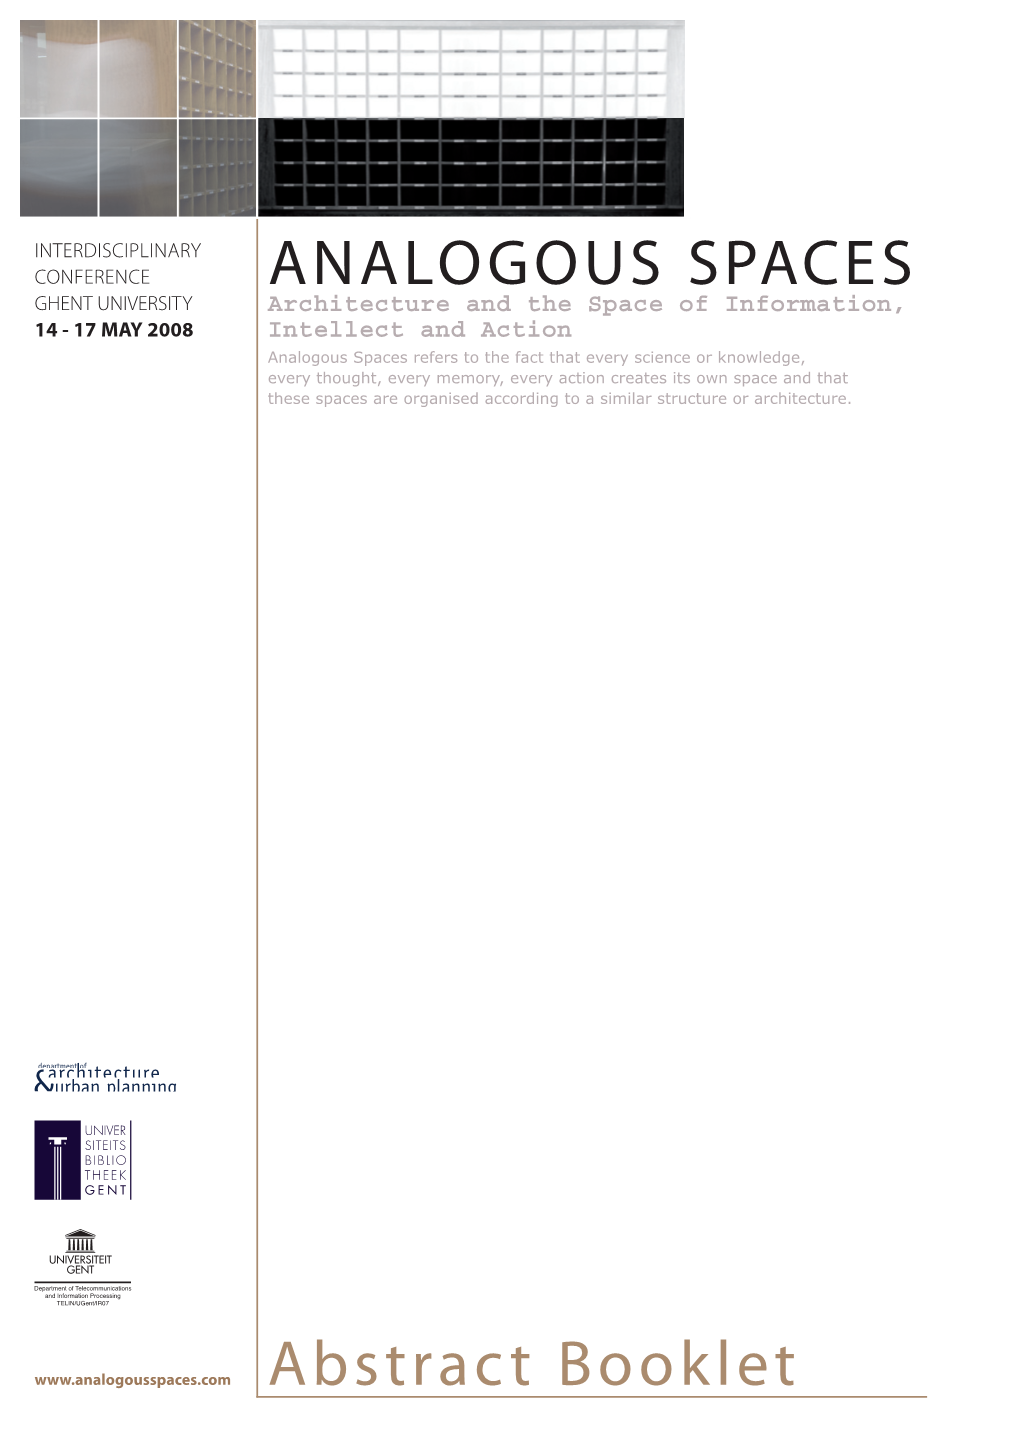 Abstract Booklet ANALOGOUS SPACES